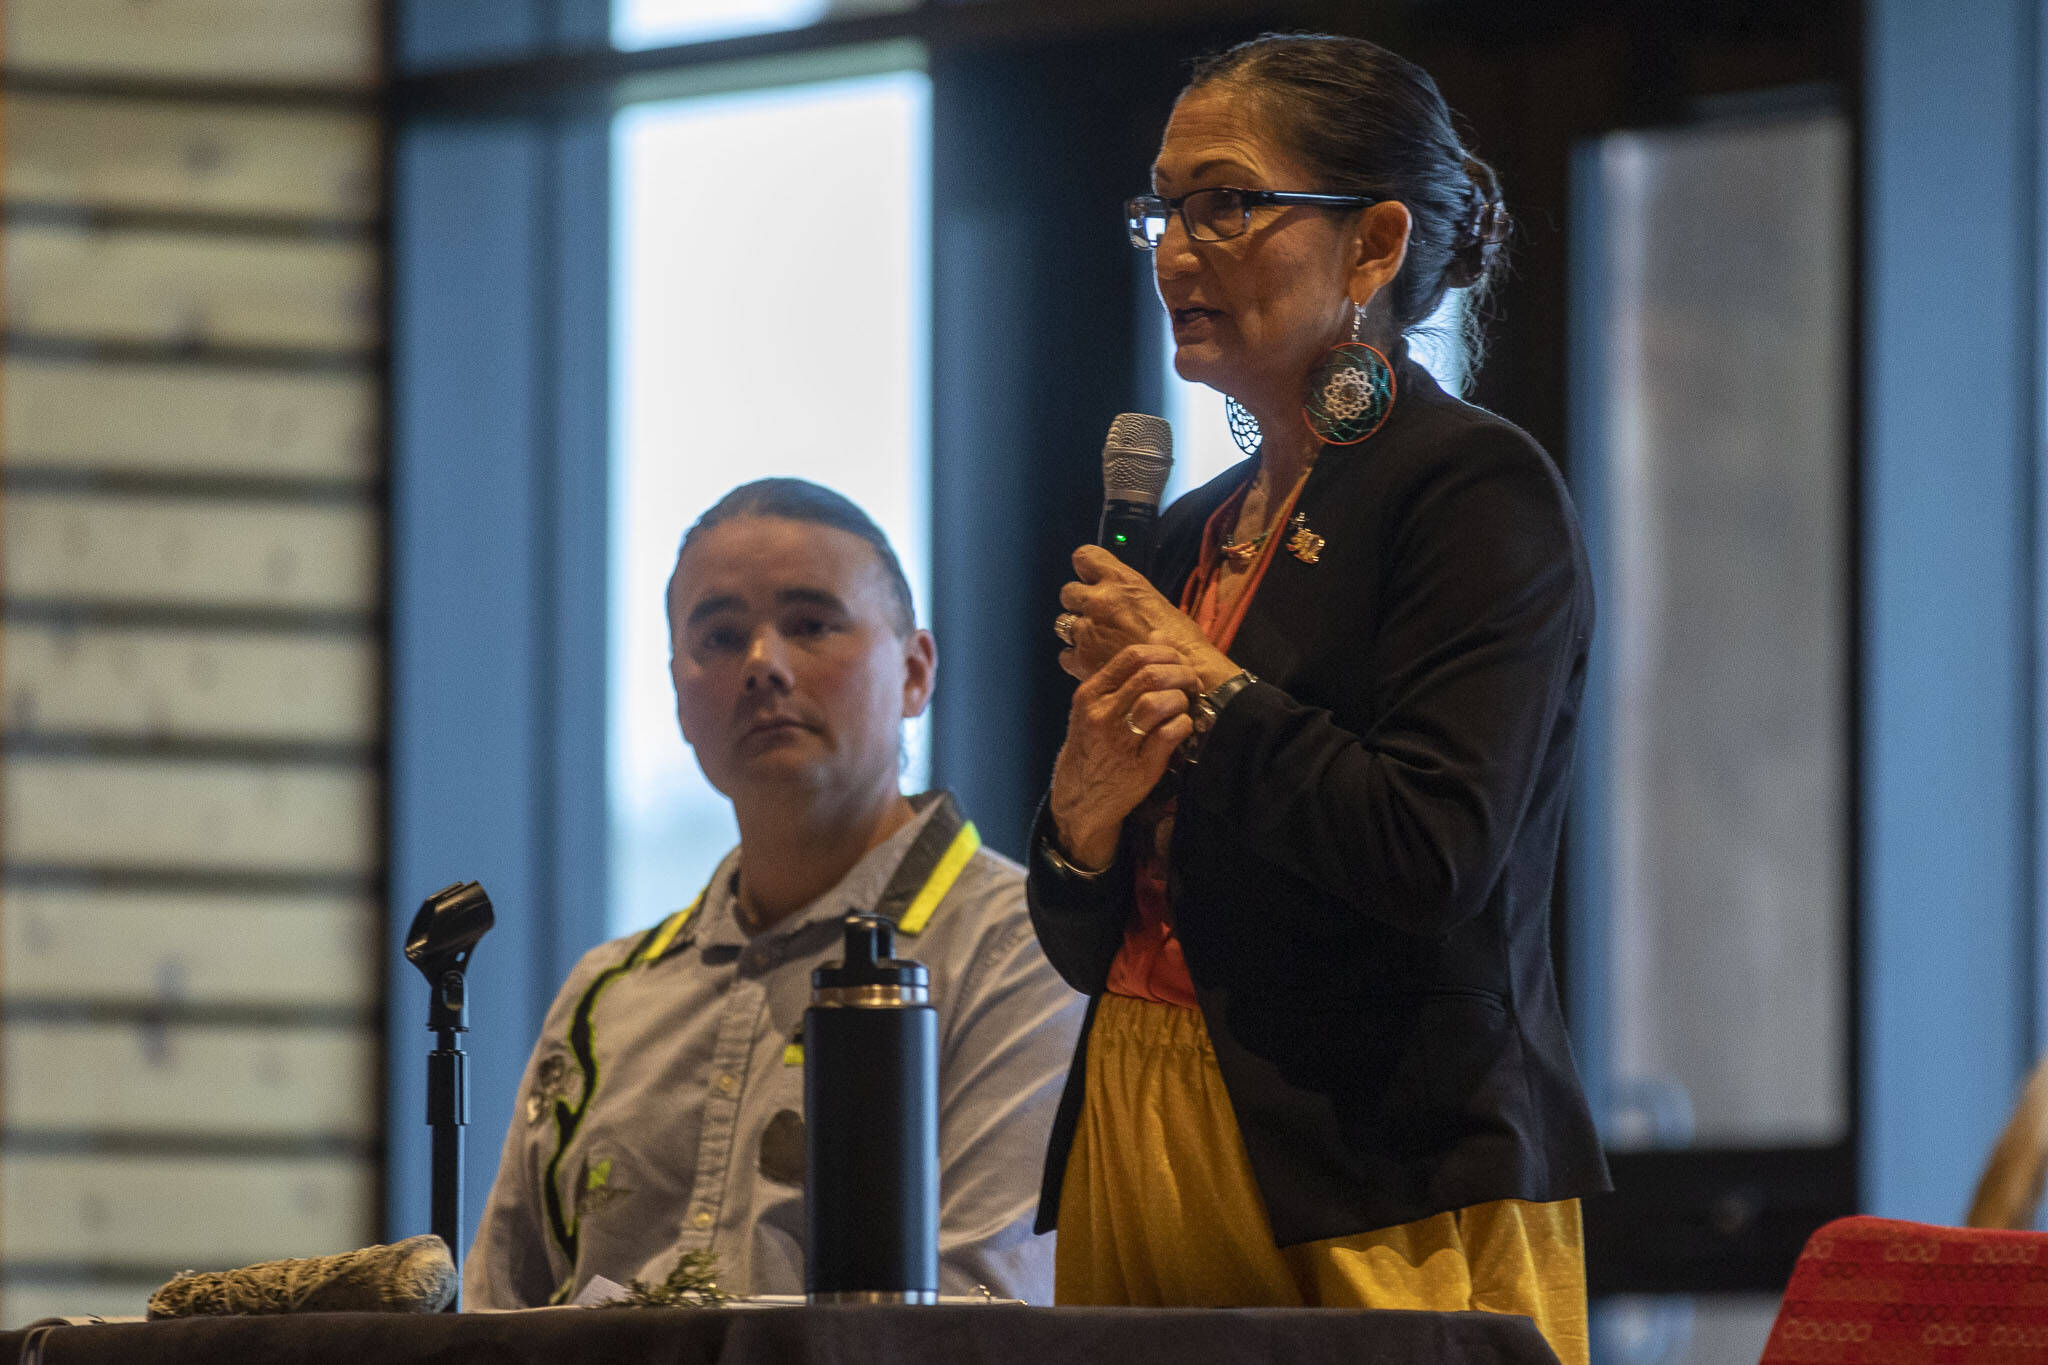 United States Secretary of the Interior Deb Haaland, right, speaks during a Road to Healing event at the Tulalip Gathering Hall in Marysville, Washington on Sunday, April 23, 2023. The tour is lead by Haaland and Department of the Interior Assistant Secretary Bryan Newland. (Annie Barker / The Herald)